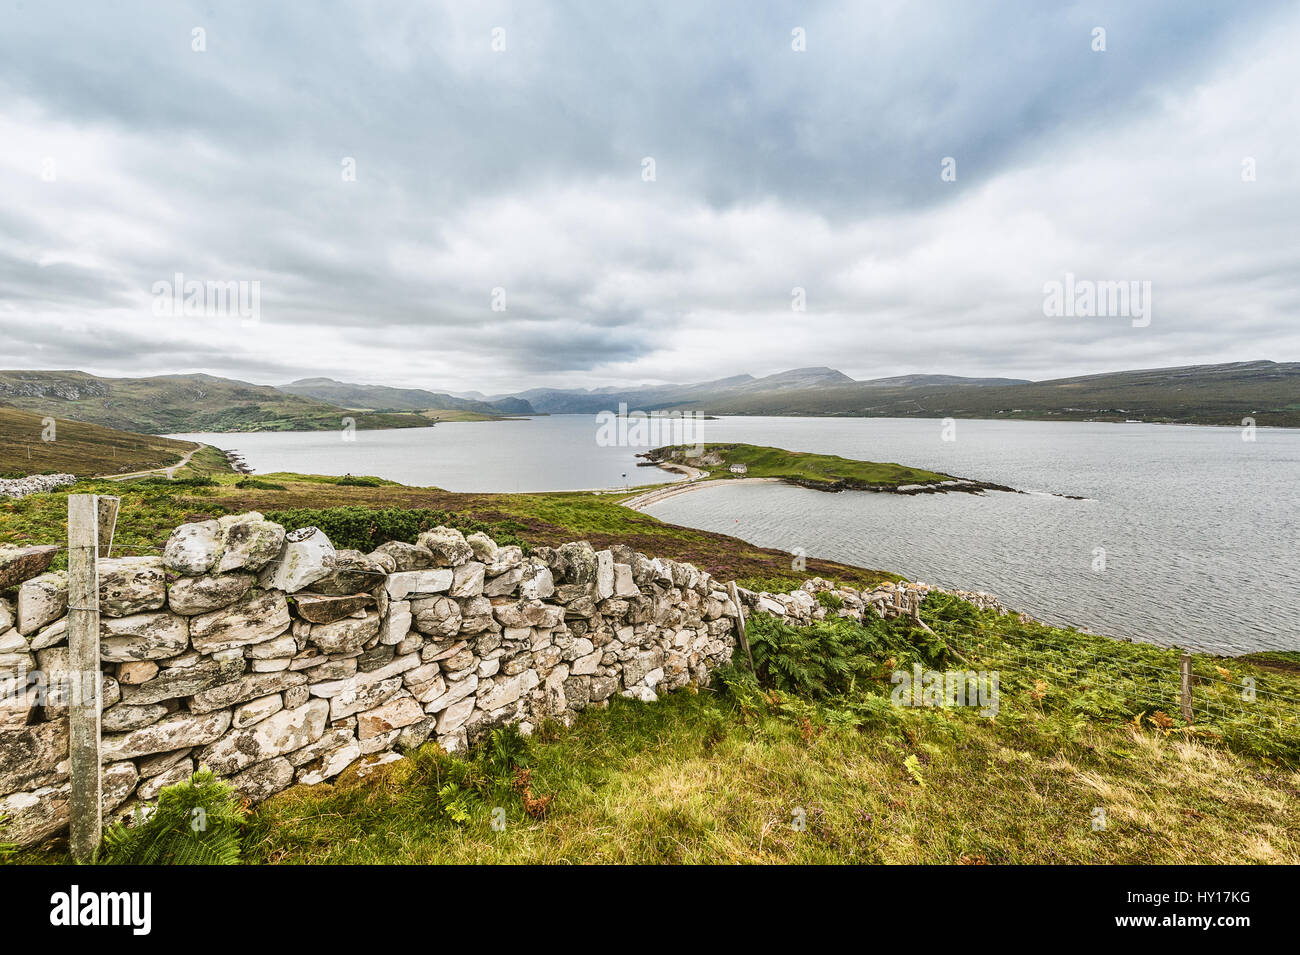 Beautiful View of Loch Eriboll from Dingwall, Northern Scotland on North Coast 500 Stock Photo